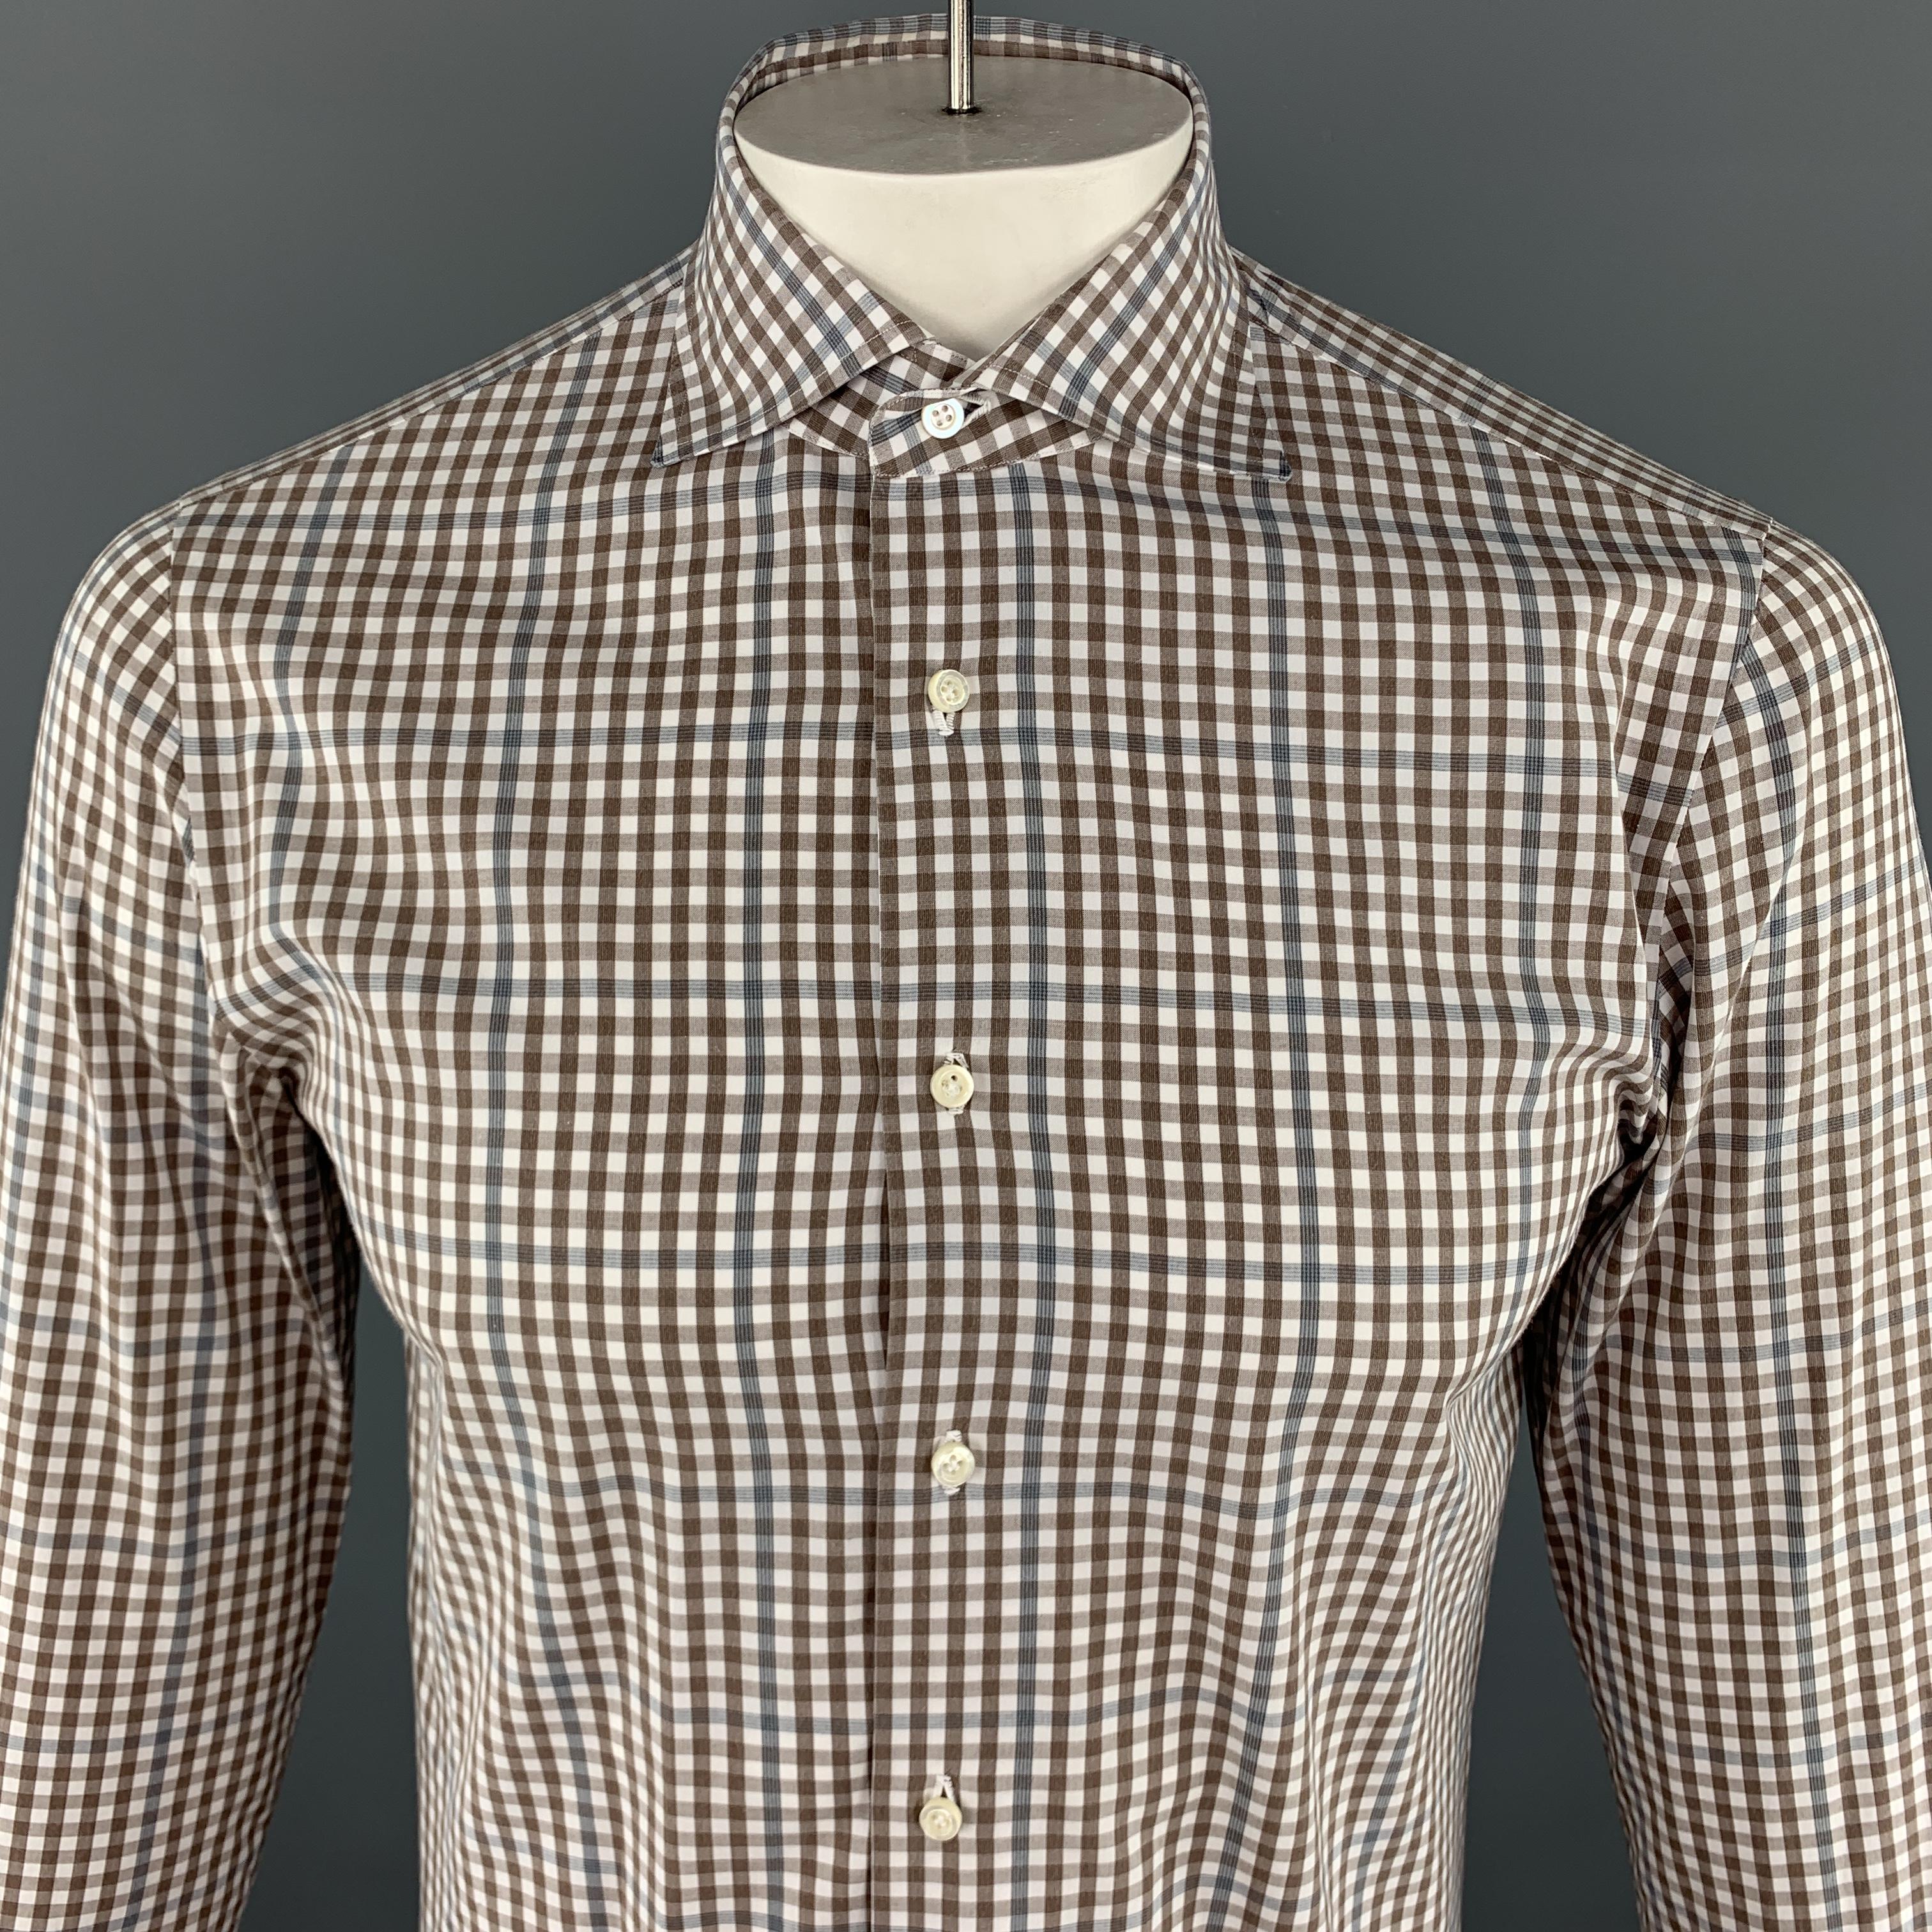 ISAIA  Long Sleeve Shirt comes in brown and white tones in a plaid cotton material, with a spread collar, buttoned cuffs, button up. Made in Italy.

Excellent Pre-Owned Condition.
 Marked: IT 39

Measurements:

Shoulder: 15.5 in. 
Chest: 42 in.